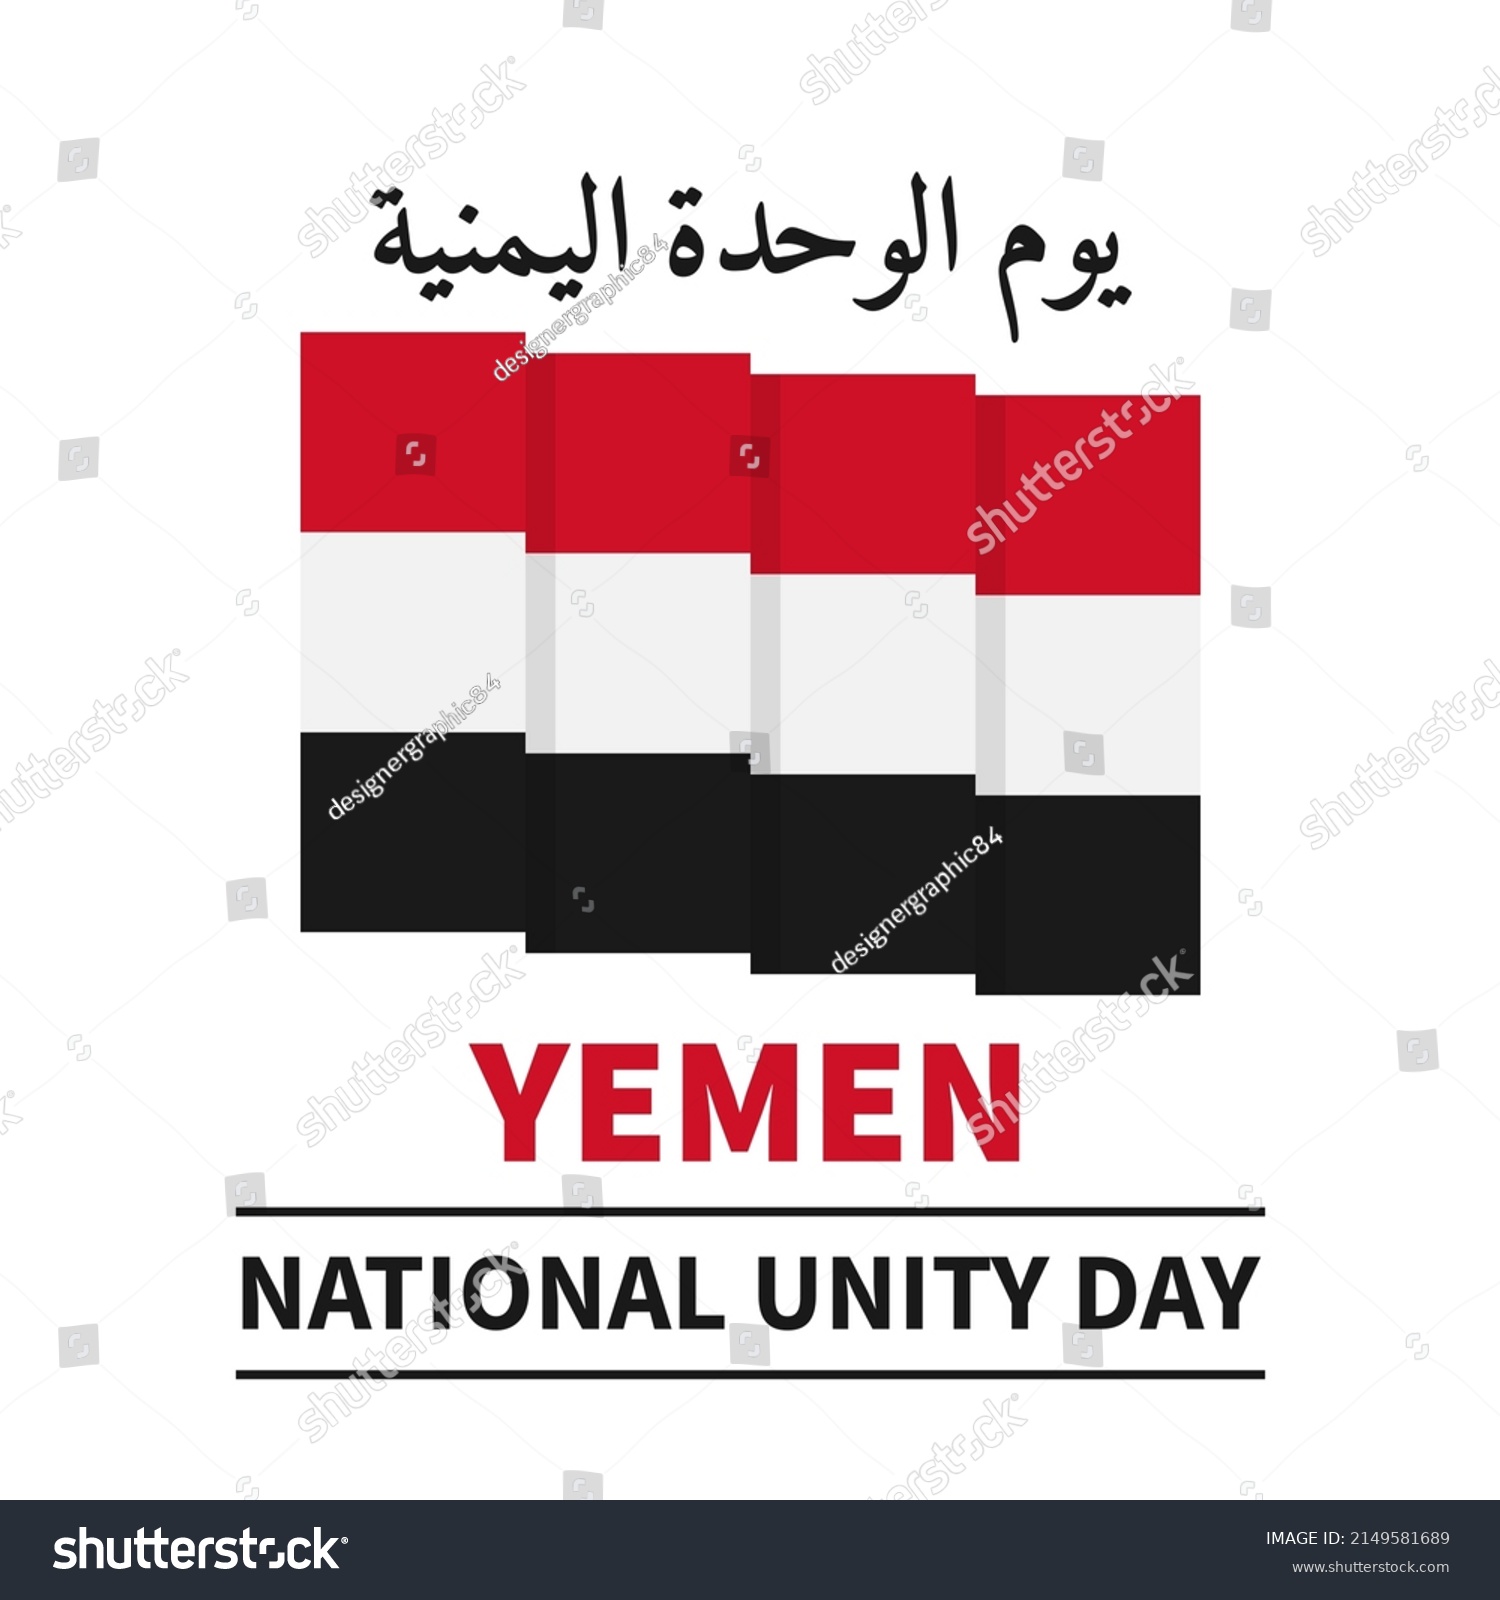 SVG of Yemen National Unity Day typography poster in English and in Arabian. National holiday celebration on May 22. Vector template for banner, flyer, greeting card, etc. svg